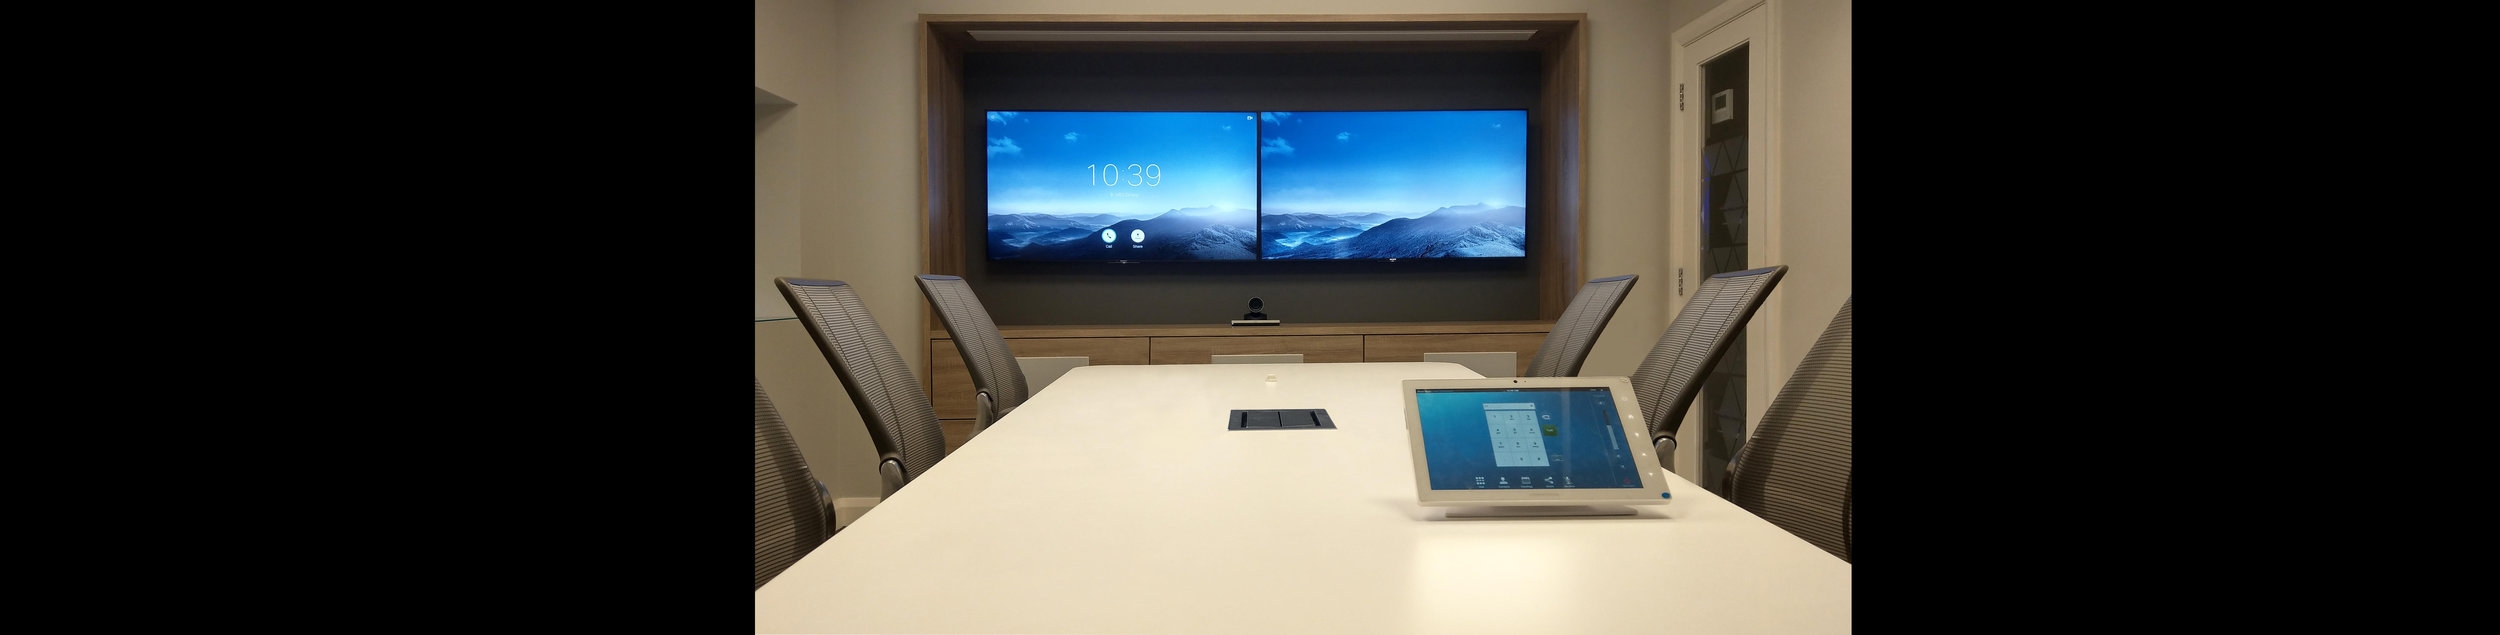 Crestron Telepresence Conference Room